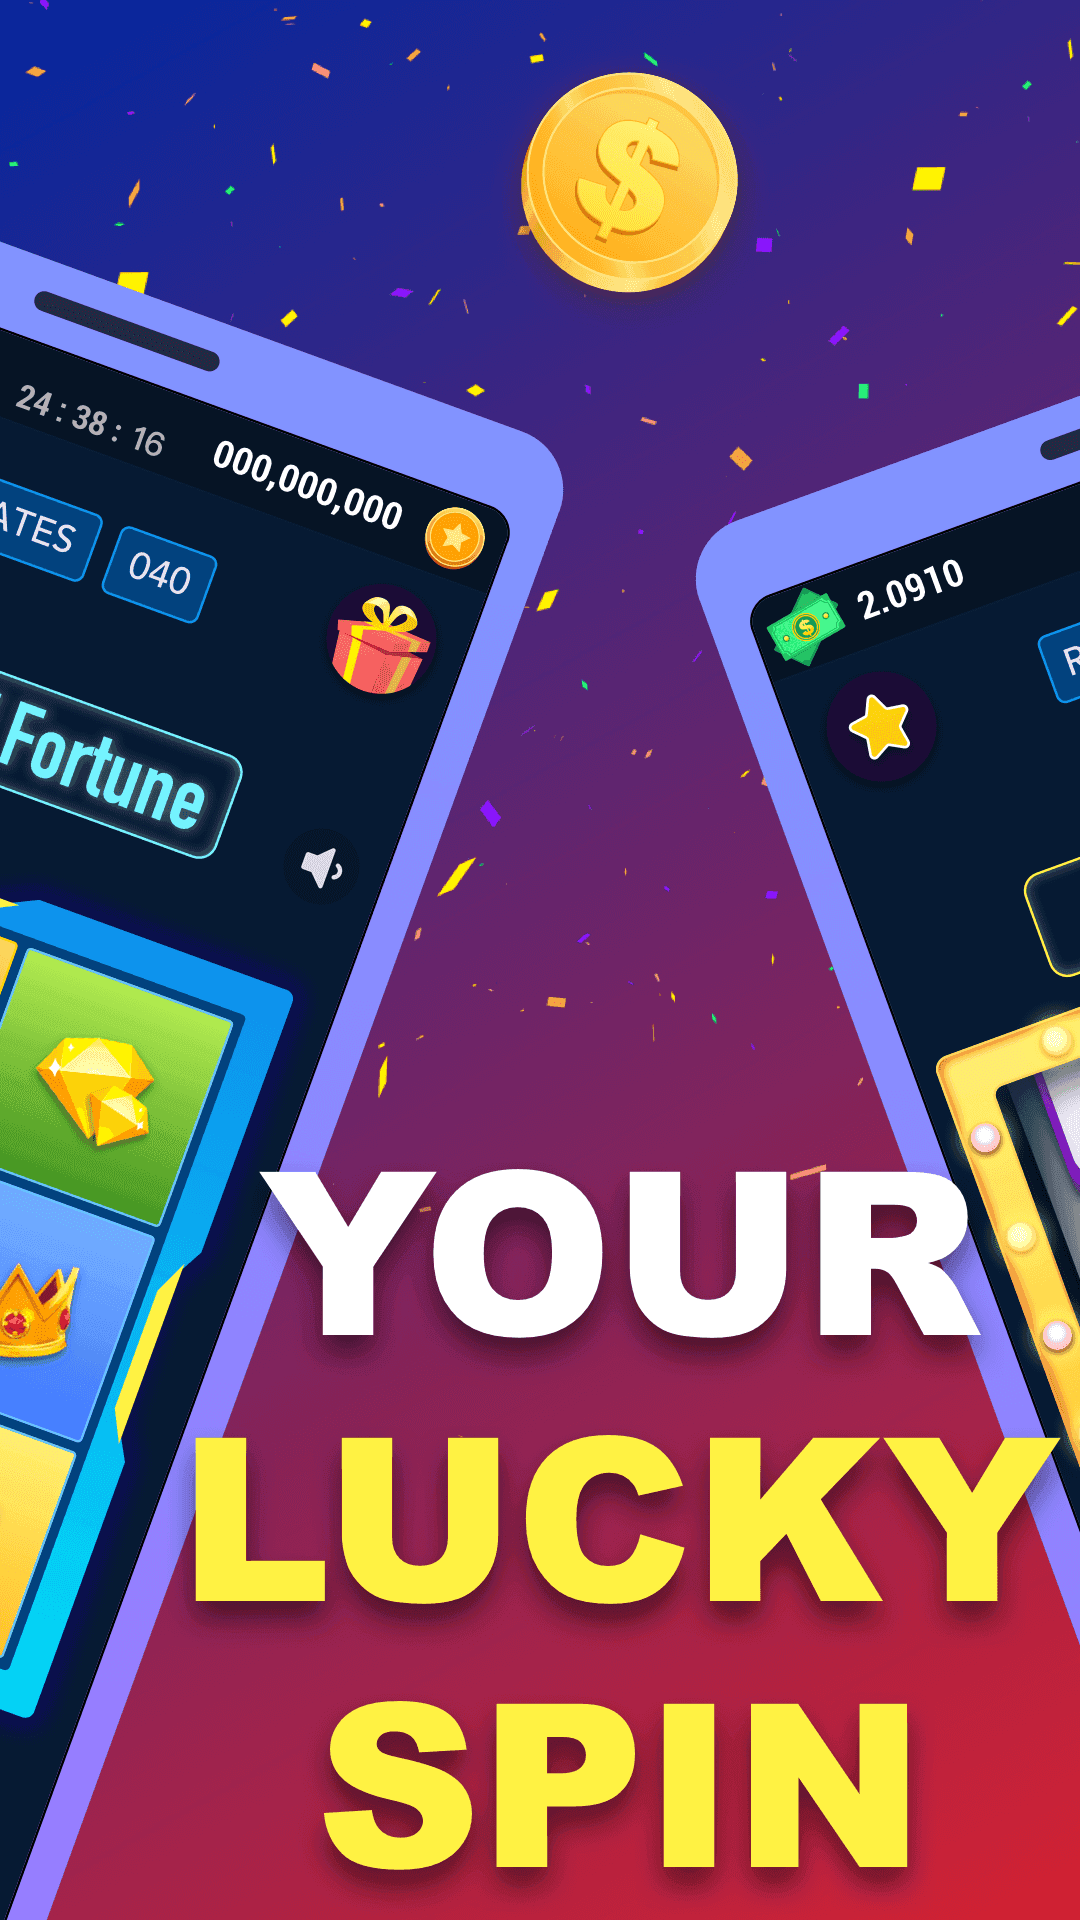 Screenshot of Lucky Spin: Good Luck & Have a Lucky Day